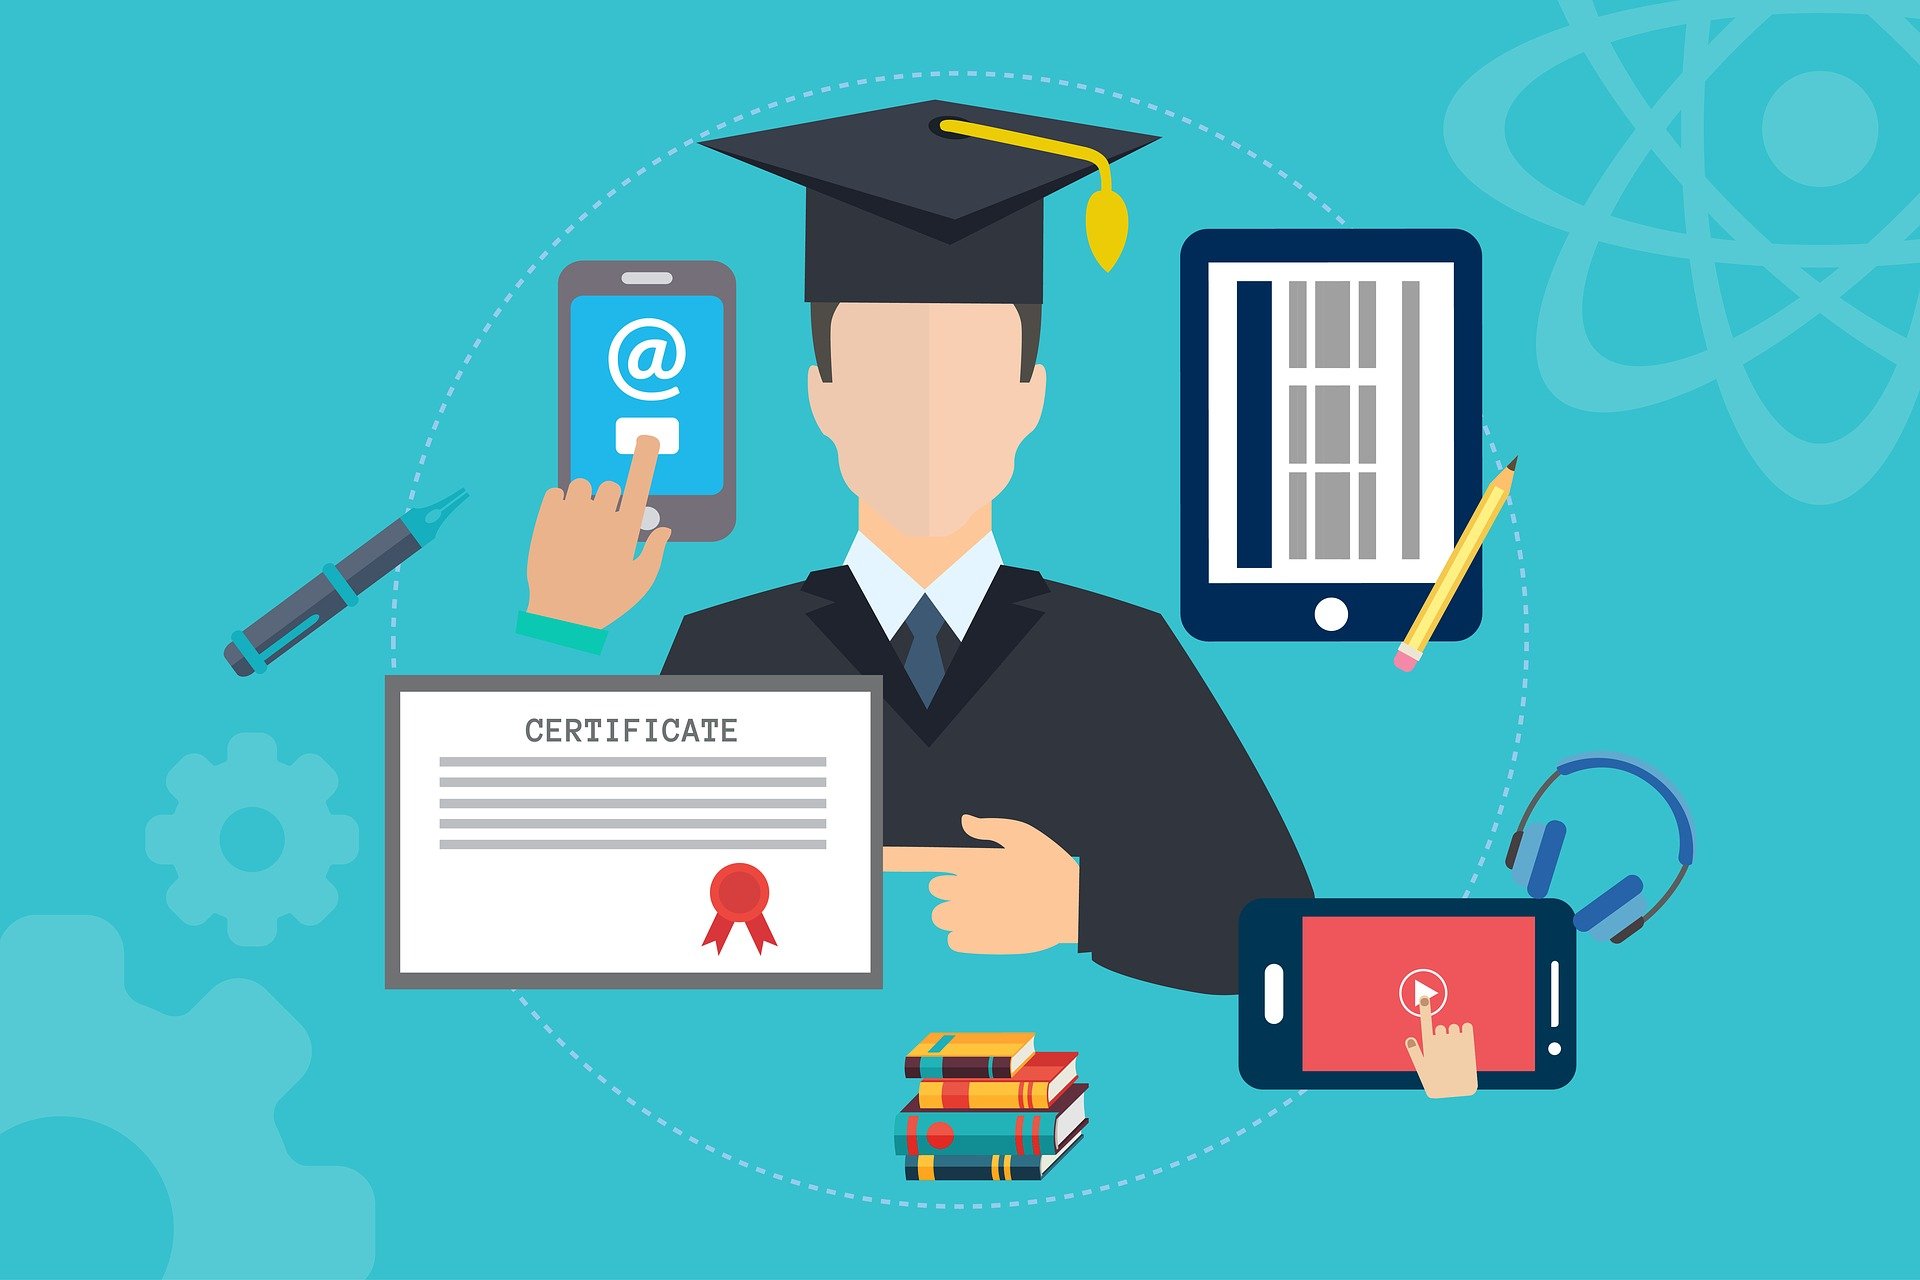 a teal background with an image of a graduate pointing to a certificate